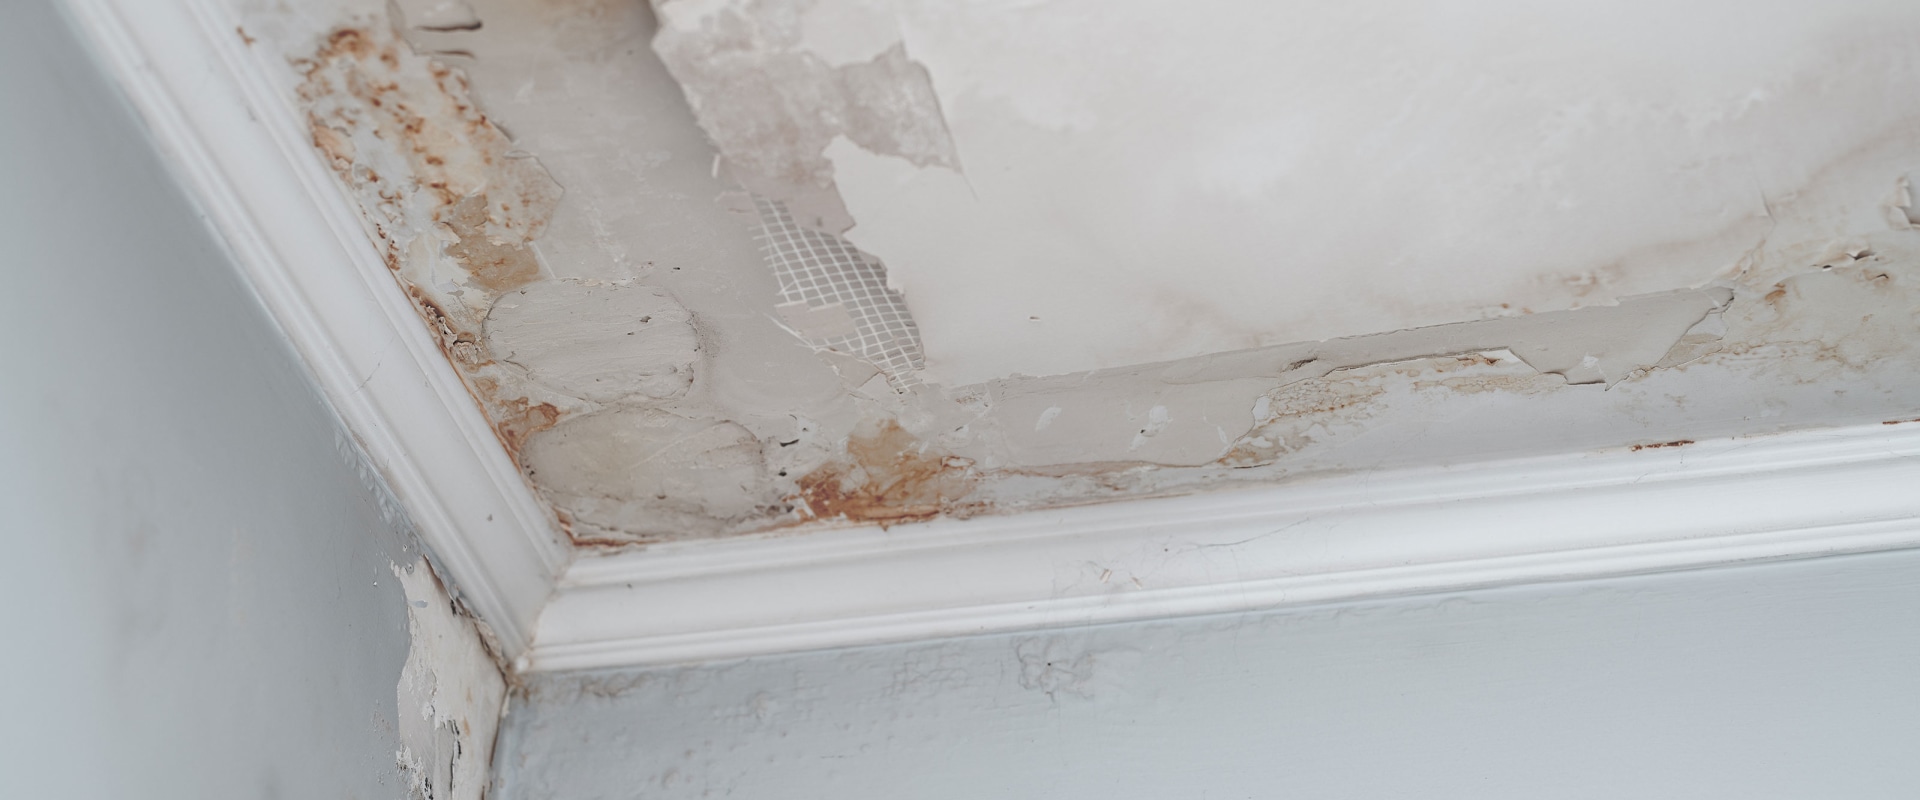 Pros Of Working With A Water Damage Restoration Company In Long Island For Renovating Your Home After Water Damage